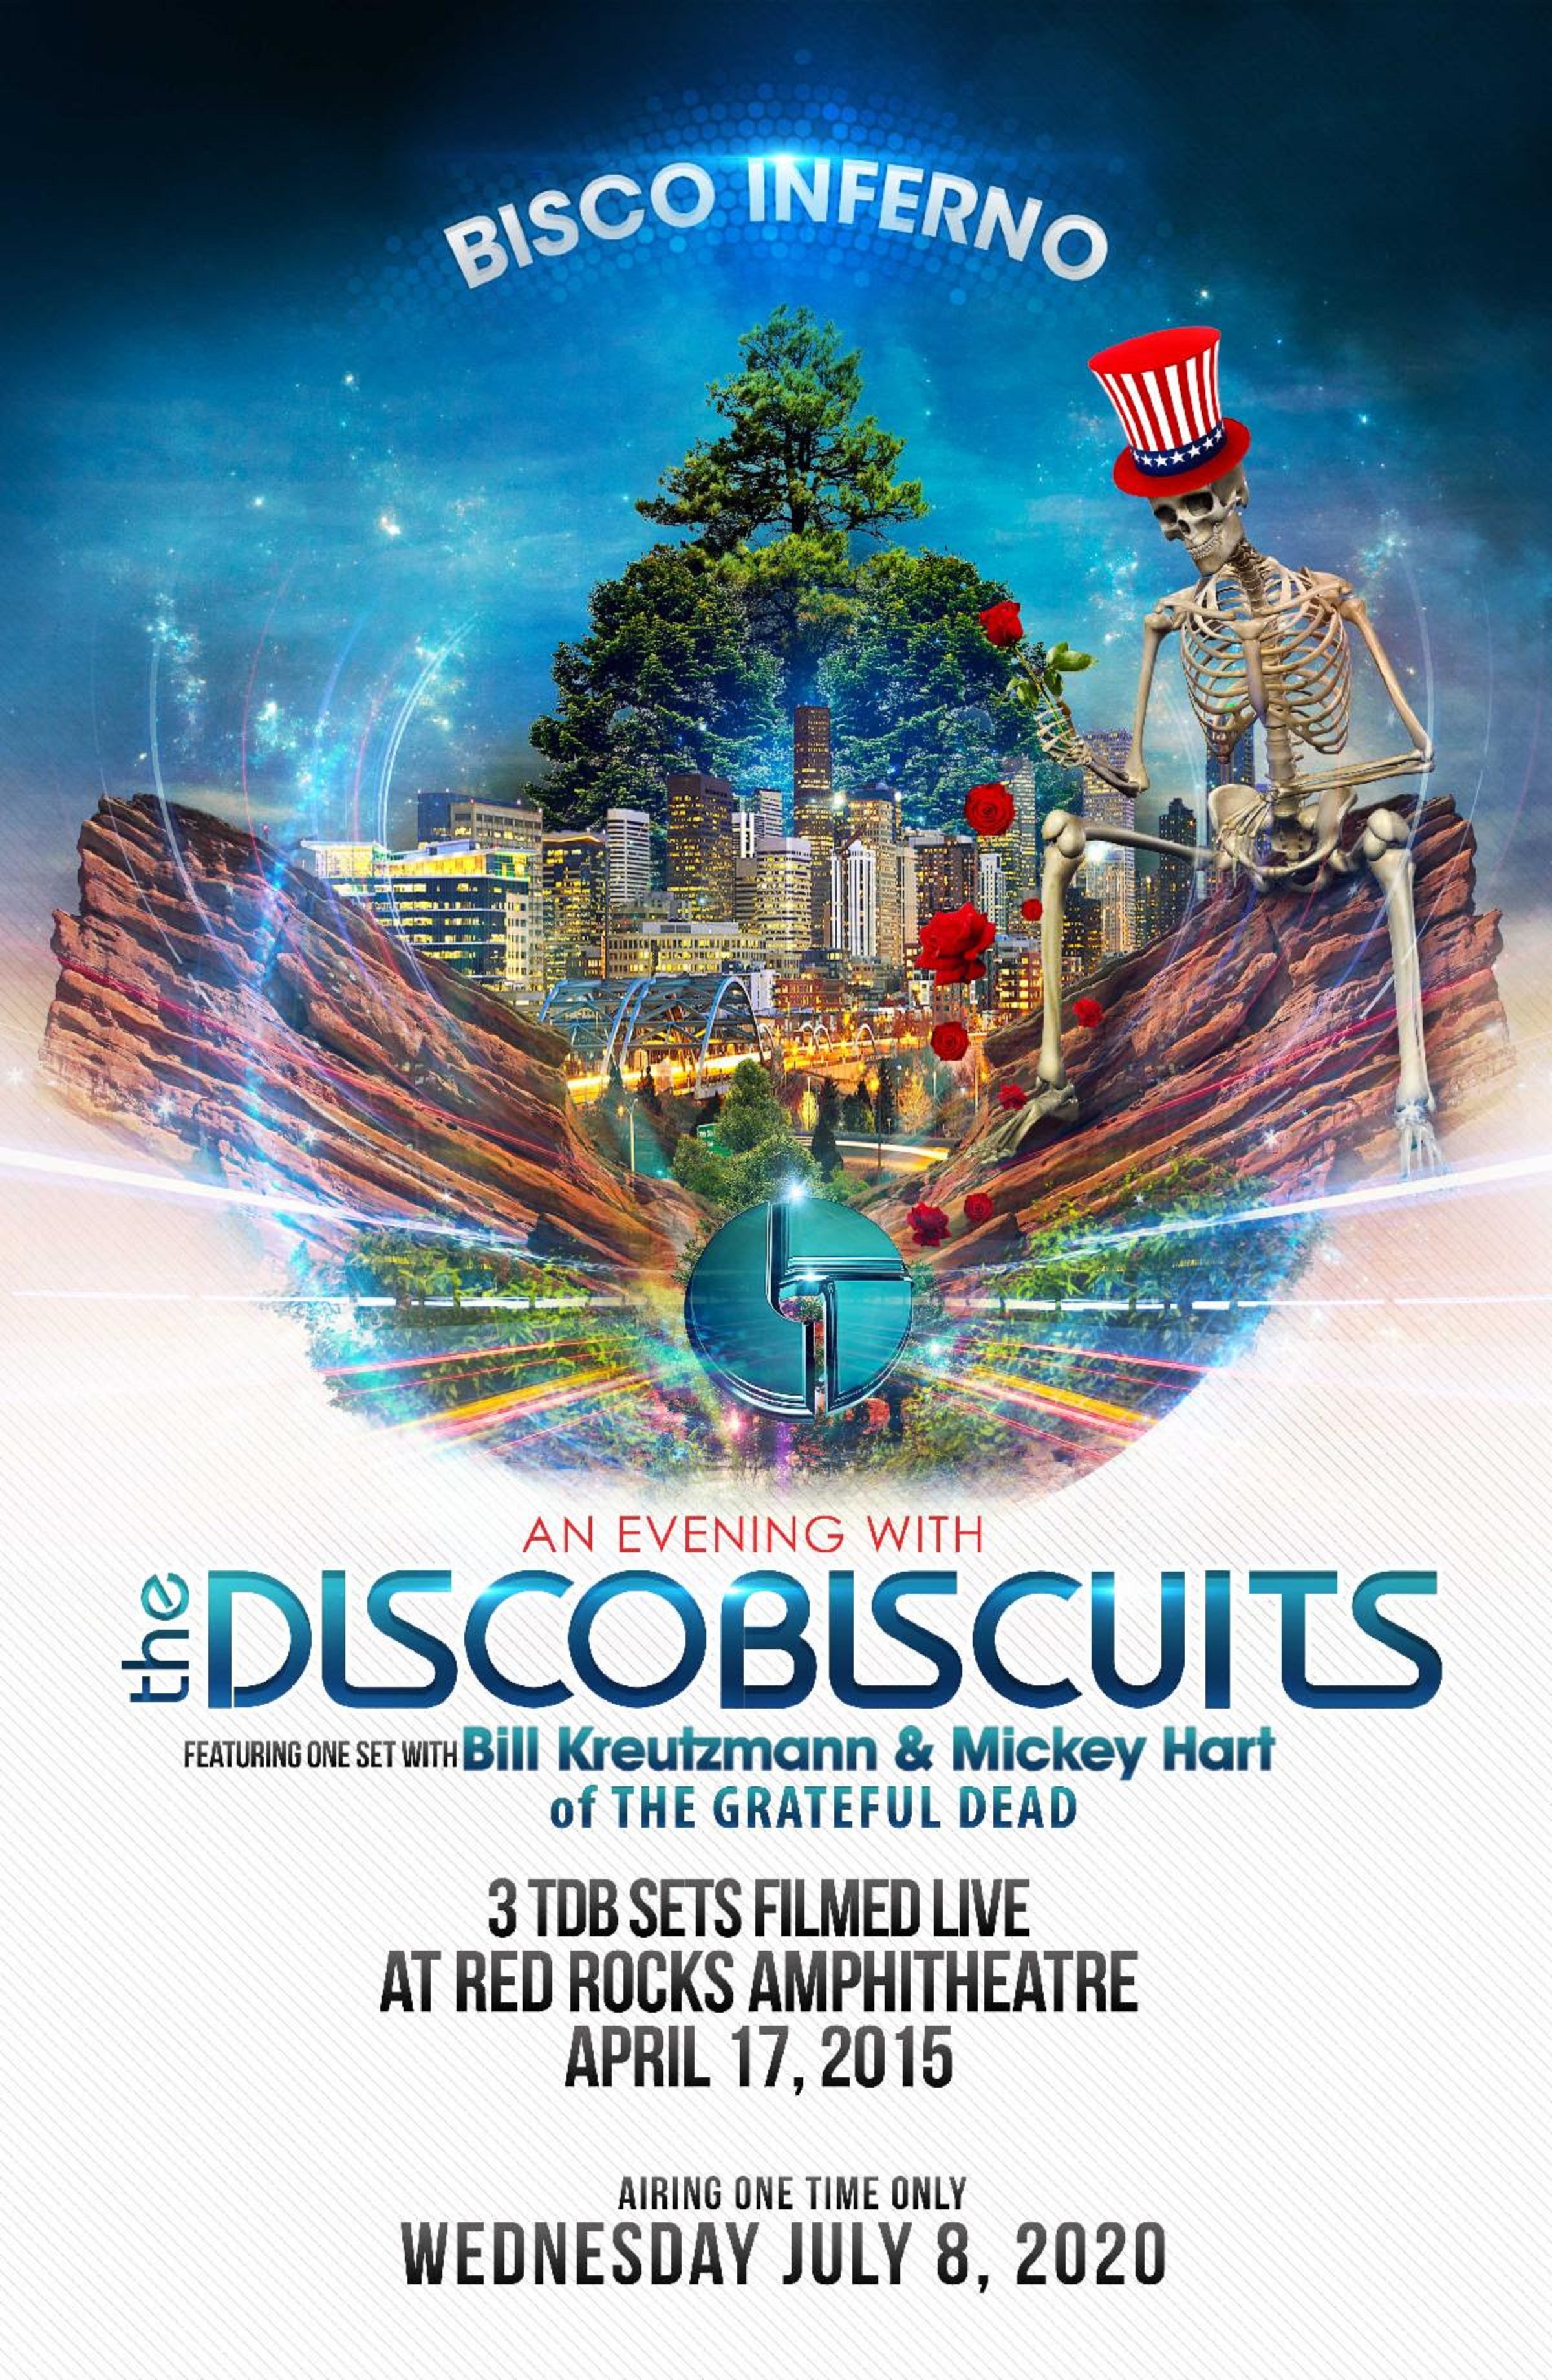 The Disco Biscuits To Air One Time Only Performance From Red Rocks With Mickey Hart And Bill Kreutzmann